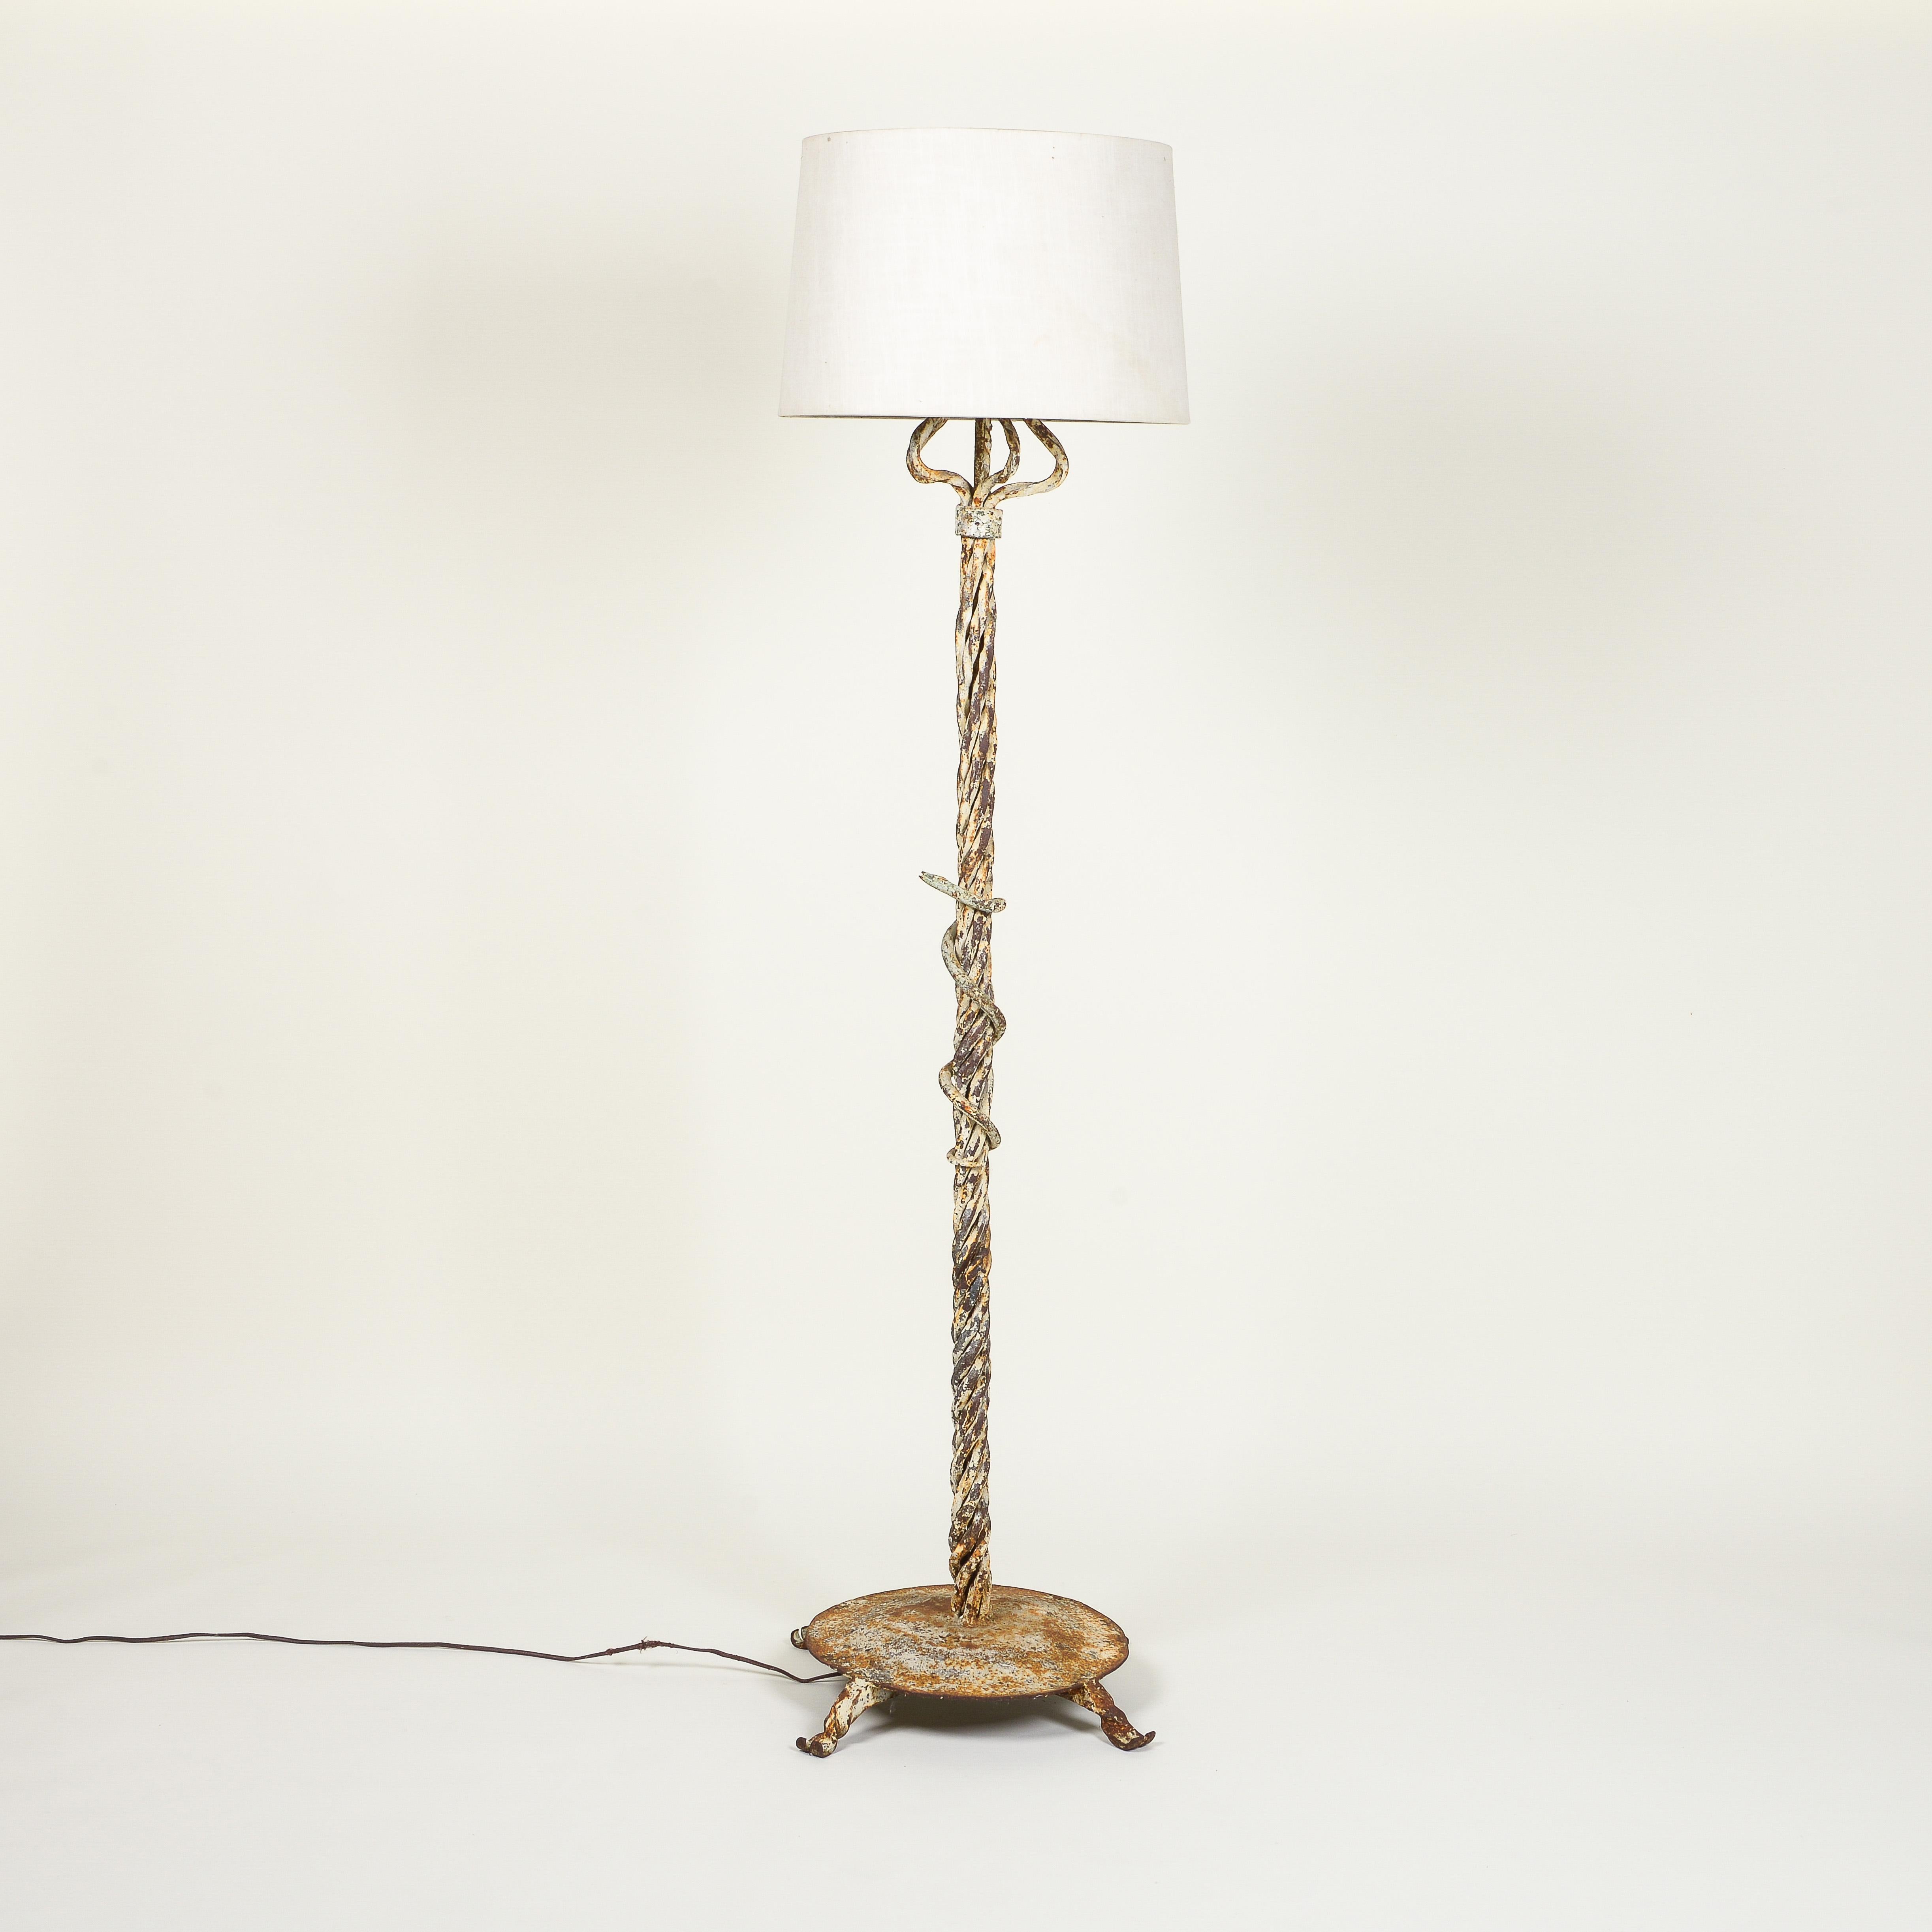 Of columnar form comprised of intertwined strands and fancifully wrapped with an asp; on a round plinth base and outscrolled feet. Fitted with two bulb sockets. With vintage linen shade.